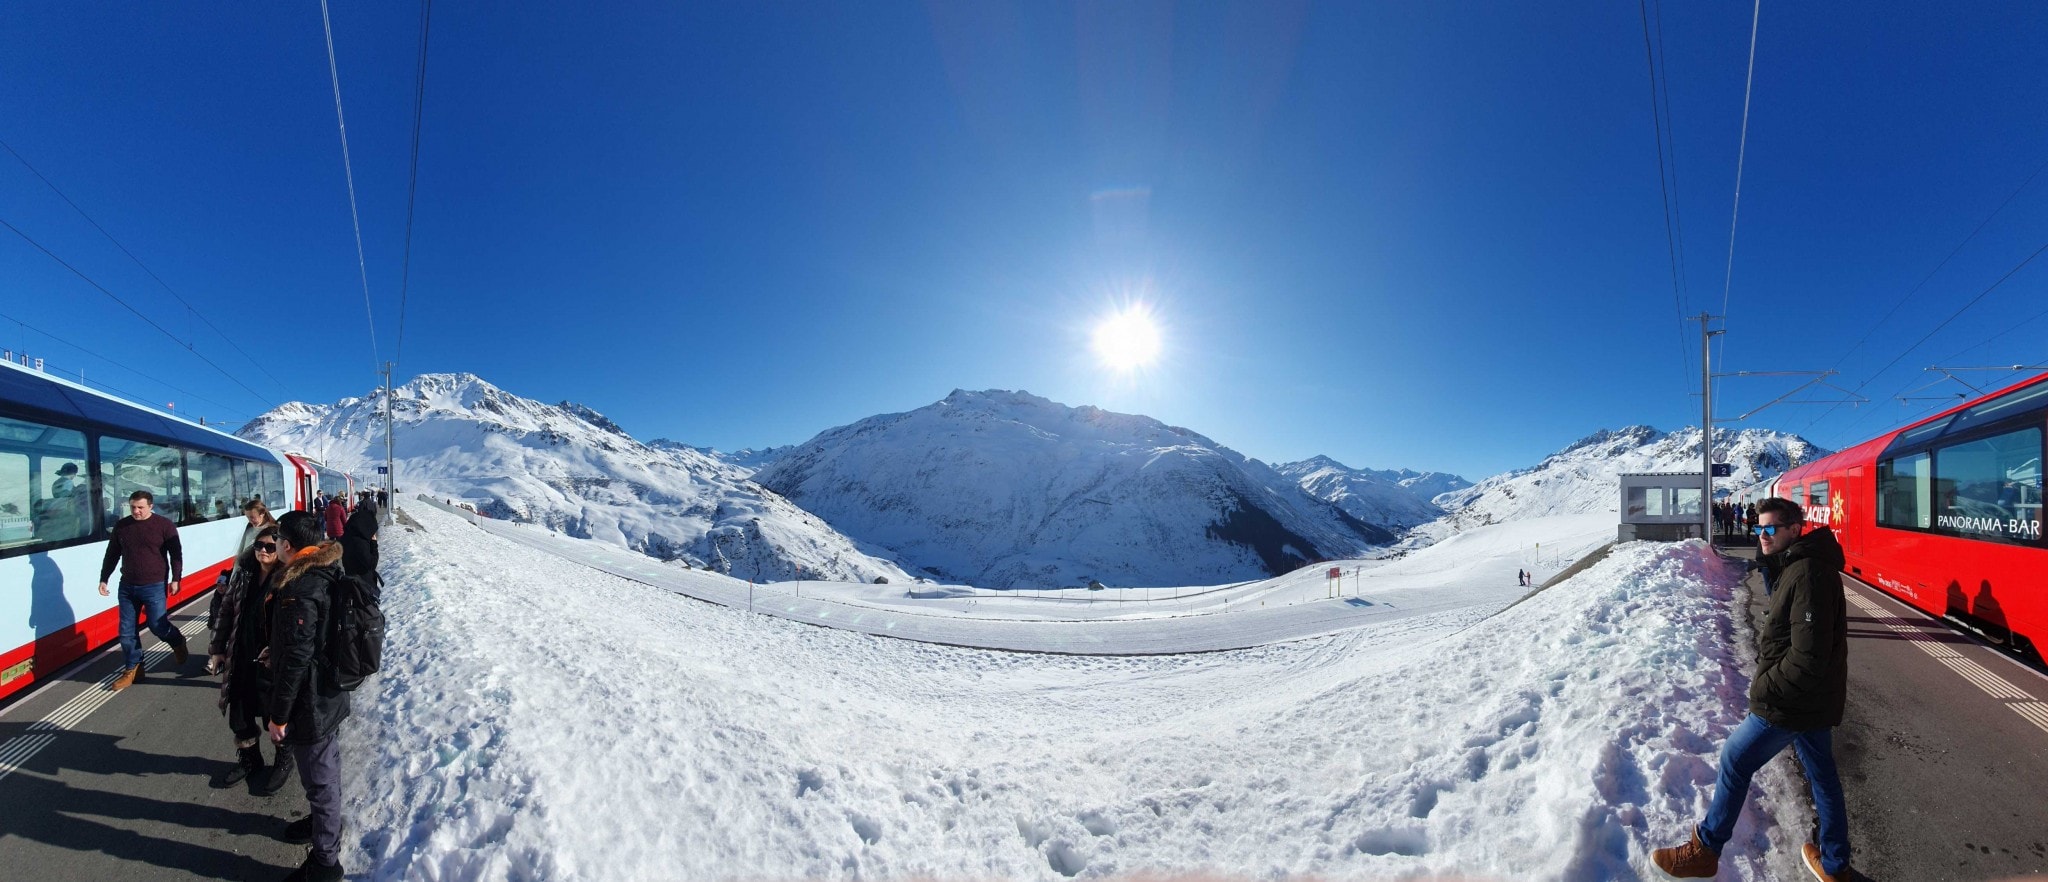 Panorama photo of train, people and view of sun, snow and mountains